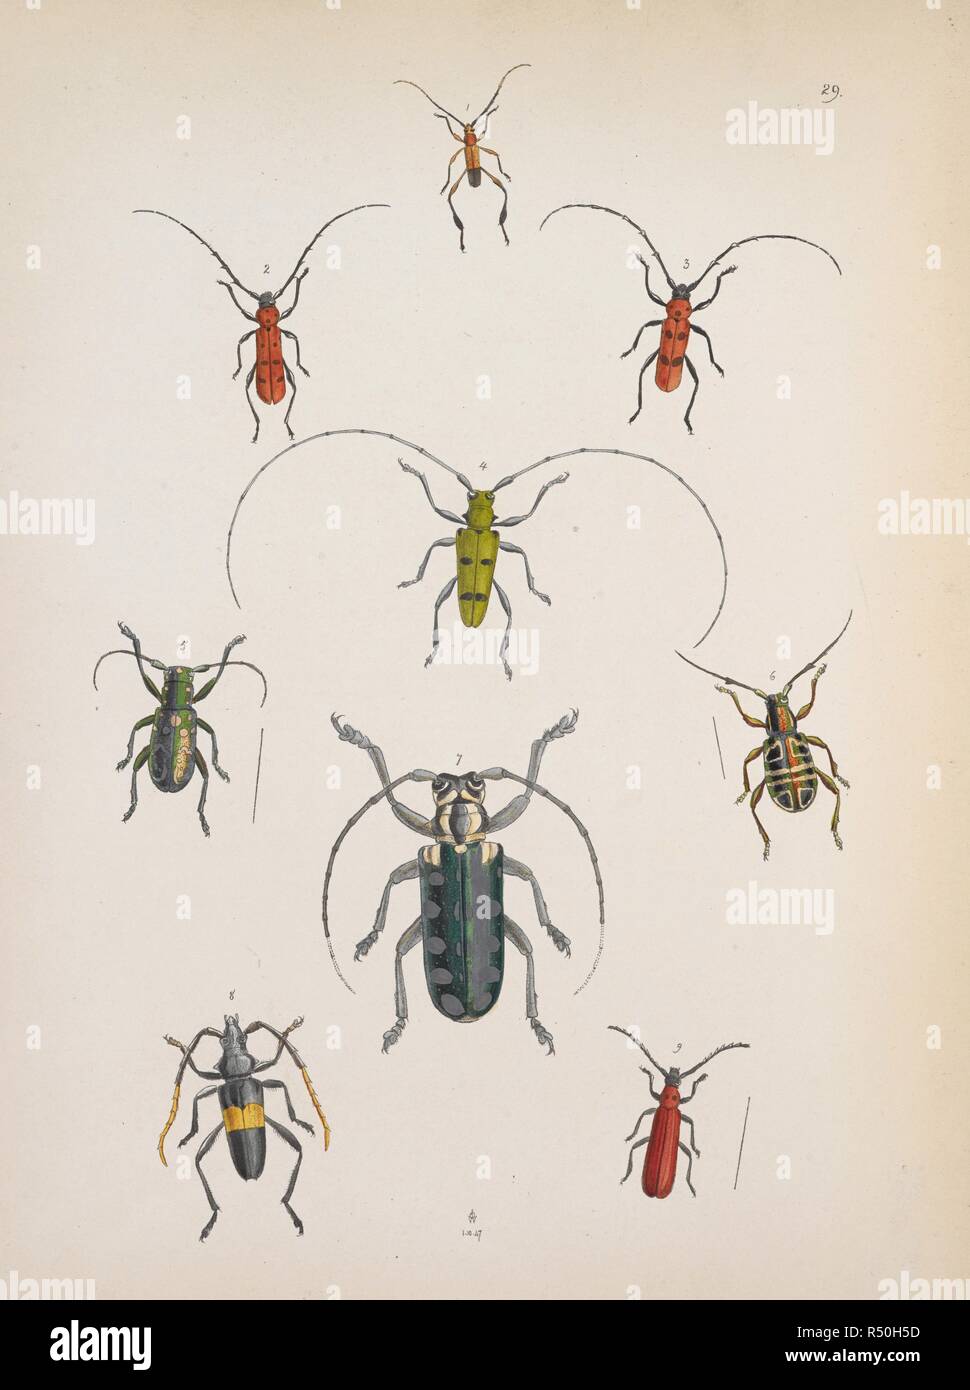 Beetles. ORDER-COLEOPTERA. Section-Losgicounes. Family- Ceramby.)  FIGURE 1. CERAMBYX (sâ€” o. not.) TELEPIIOKOIDES. FIGURE 2. PURPURICENUS lO-PUISCTATUS. FIGURE 3. PURPURICENUS 0-PUNCTATUS. FIGURE 4. MONOHAMMUS BIFASCIATUS.  FIGURE 5. ABRYNA EXIMIA.  FIGURE 6. DOLIOPS GEOMETRICA. FIGURE 7. ANOPLOPHORA LUCIPOR. FIGURE 8. PACHYTERIA DIMIDIATA.  FIGURE 9. SAPERDA (sâ€” G. Nov.) BICOLOR.       . The Cabinet of Oriental Entomology; being a selection of some of the rarer and more beautiful species of Insects, natives of India and the adjacent islands. London, 1848. Source: 1258.k.17 plate 29. Autho Stock Photo